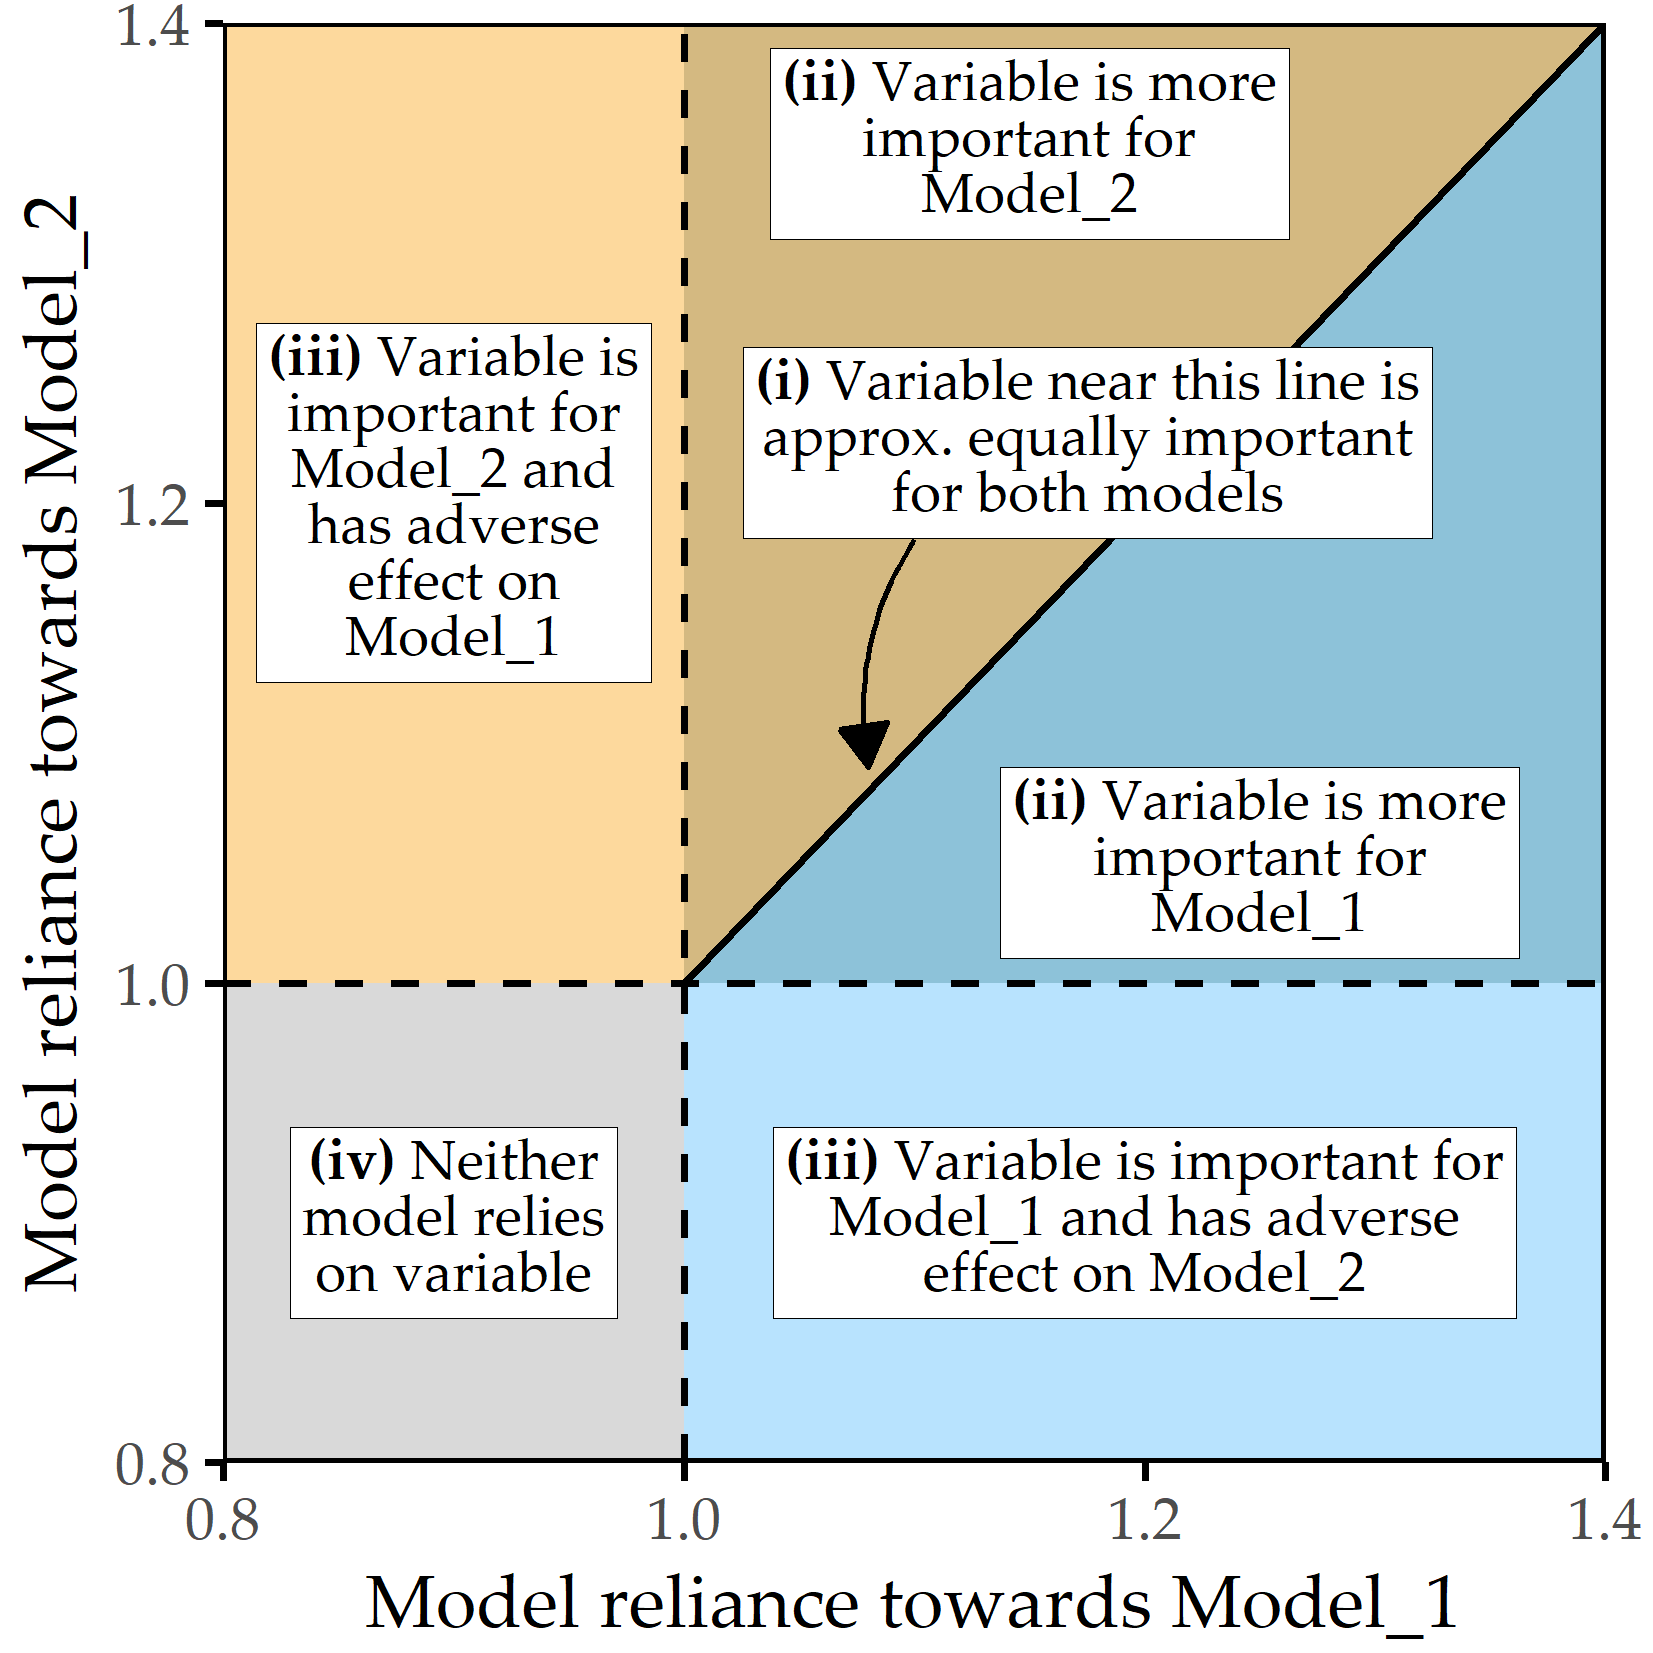 Subpopulation-specific variable importance. The position of a point represents the model reliance score of a variable for the best model trained on the respective subpopulation, denoted as Model_1 (x-axis) and Model_2 (y-axis). Higher values represent a higher attribution of a variable relative to the model prediction. There are four characteristic areas: (i) important variables with similar attributions to Model_1 and Model_2; (ii) important variables with higher attribution to one of the subpopulation-specific models; (iii) variables important to either Model_1 or Model_2 but adversarial to the other model; (iv) variables that are adversarial to both models.